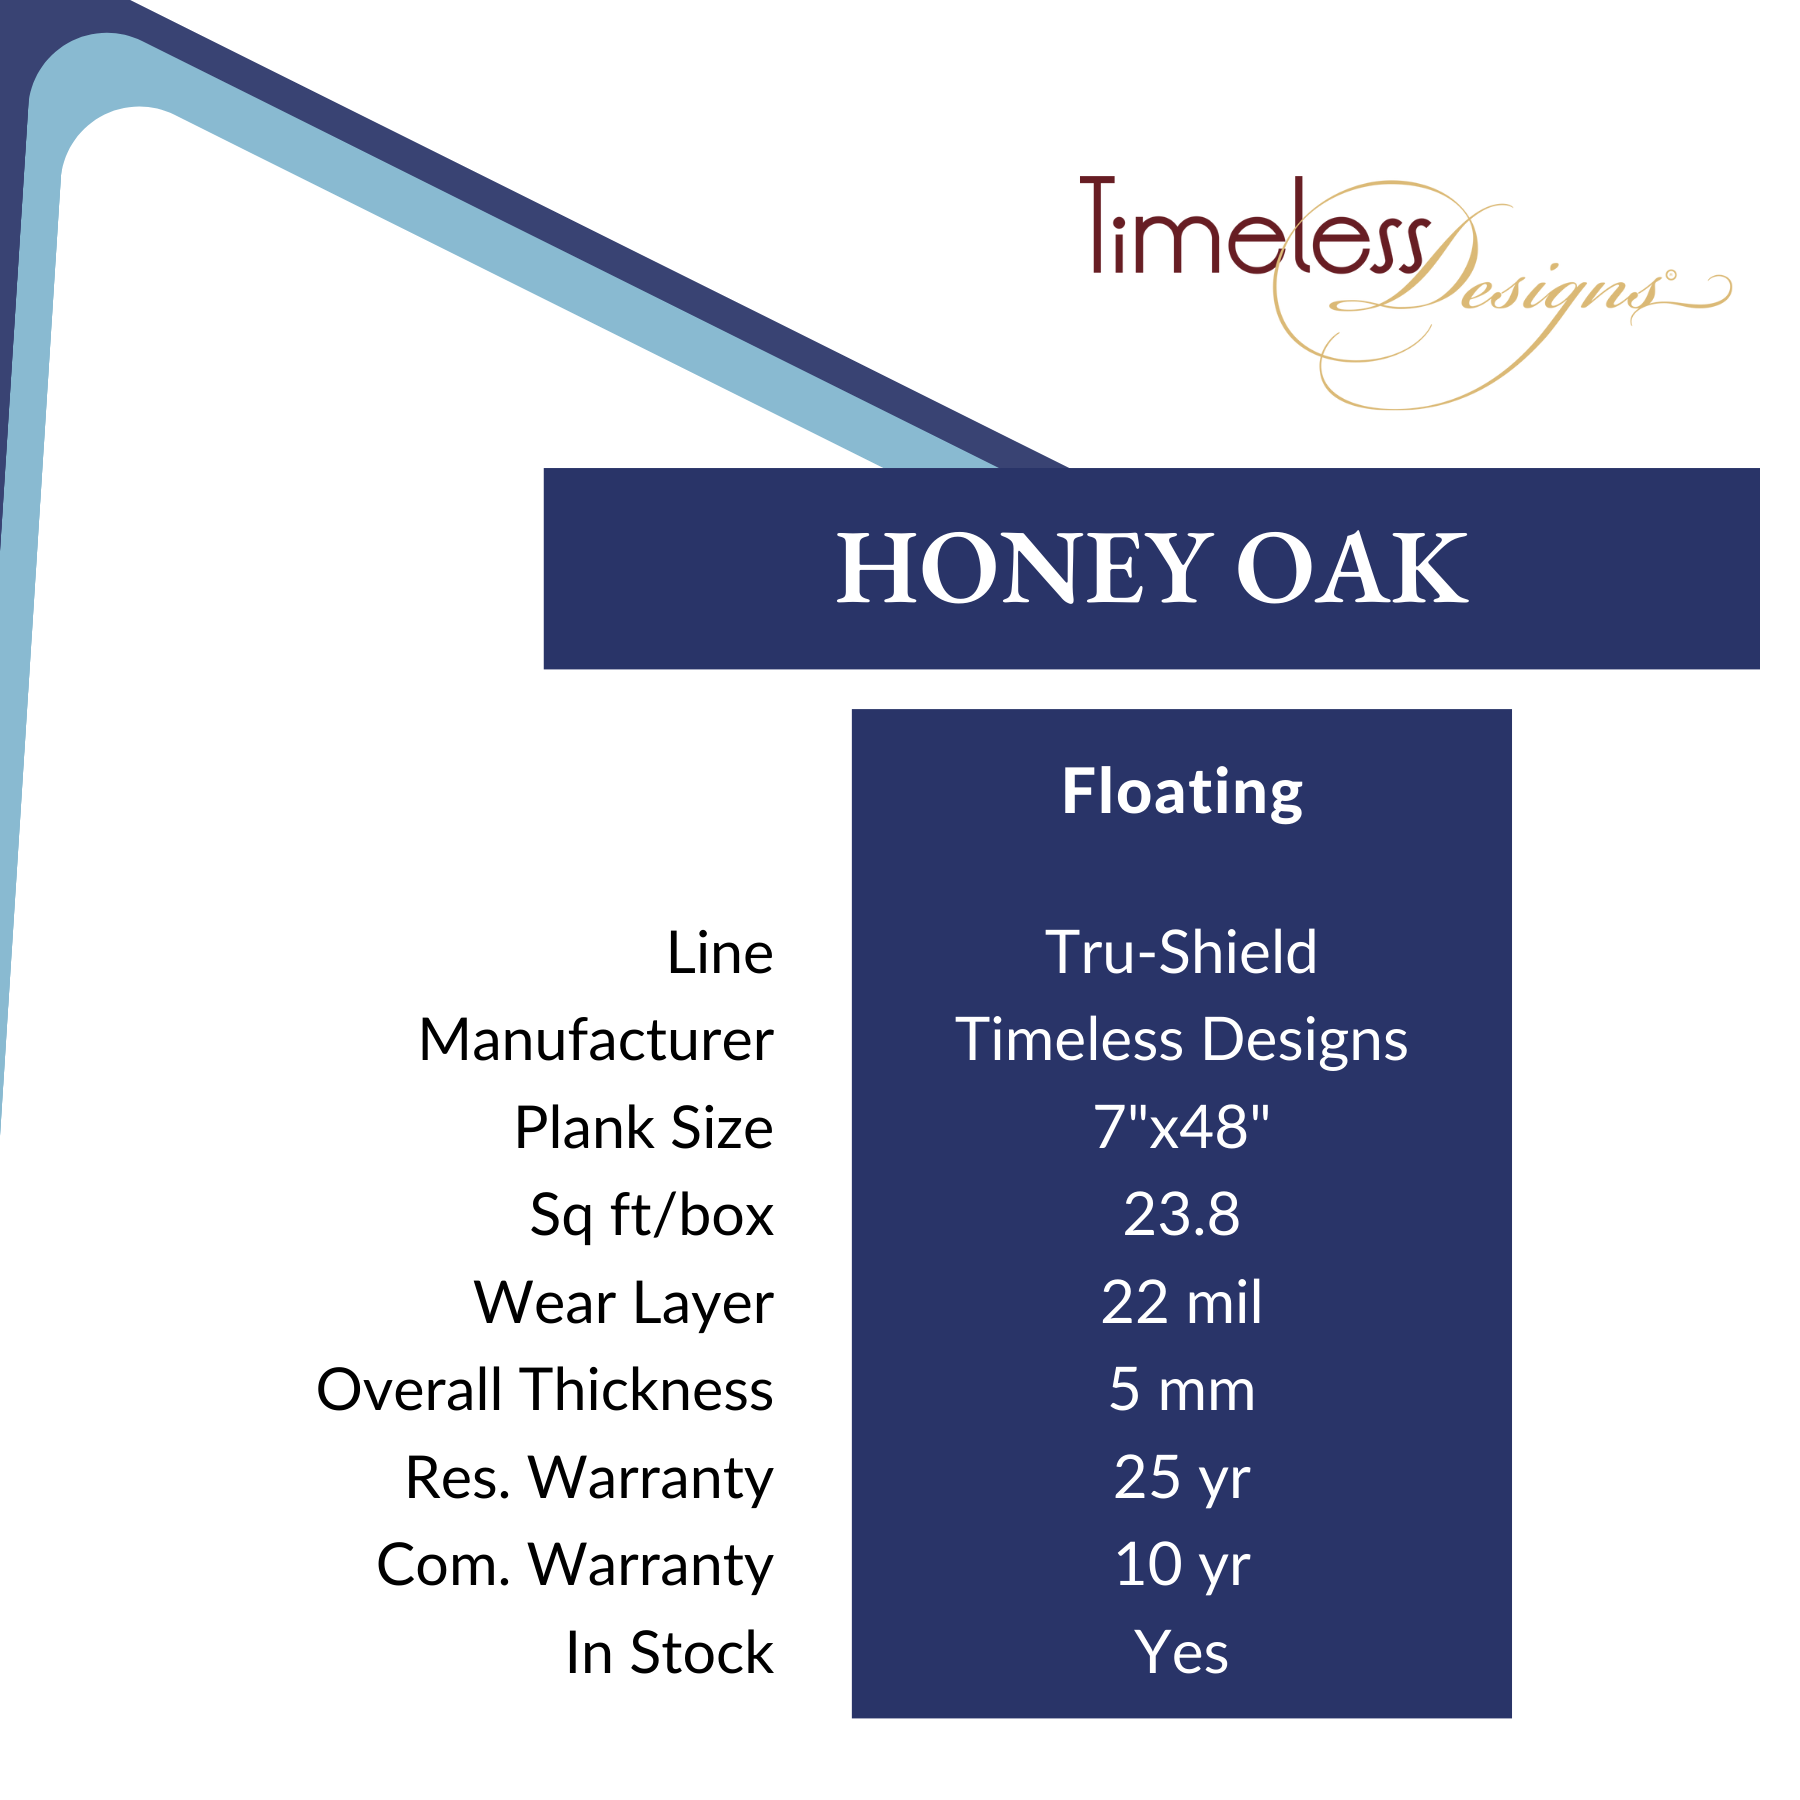 Honey Oak Specs by Timeless Designs from Calhoun's in Springfield, IL